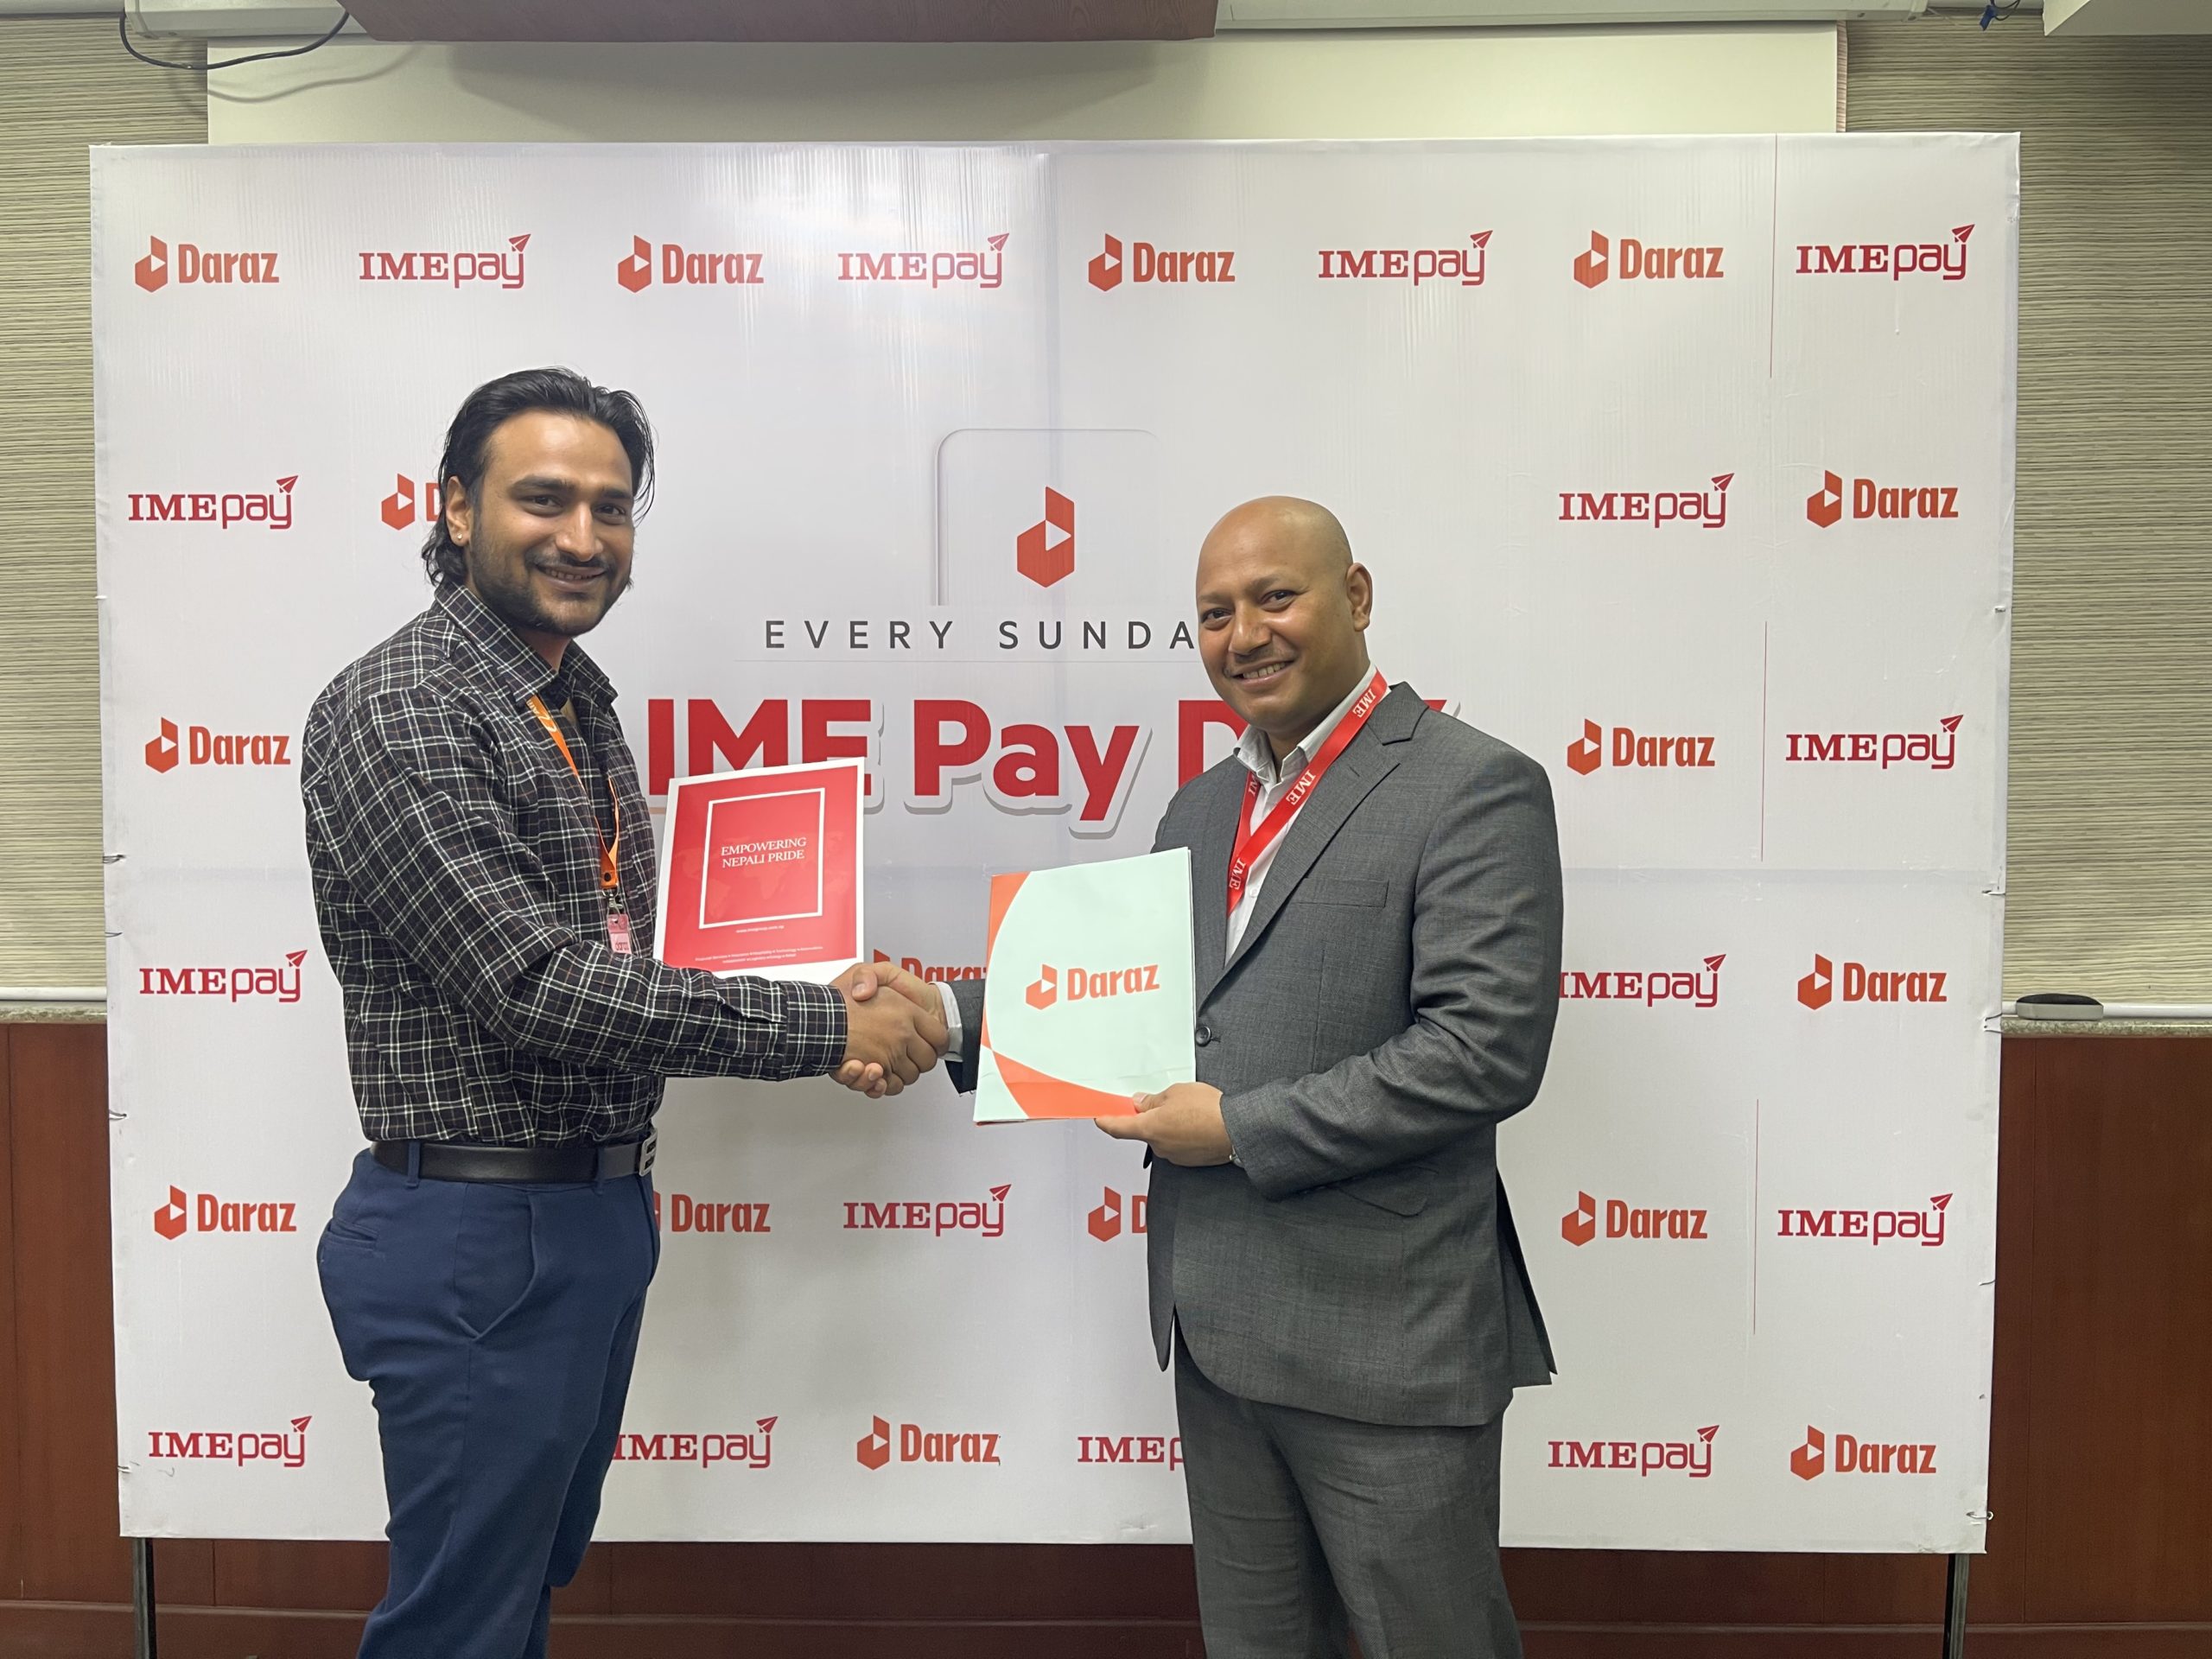 Daraz signs agreement with IME Pay for special Sunday discounts